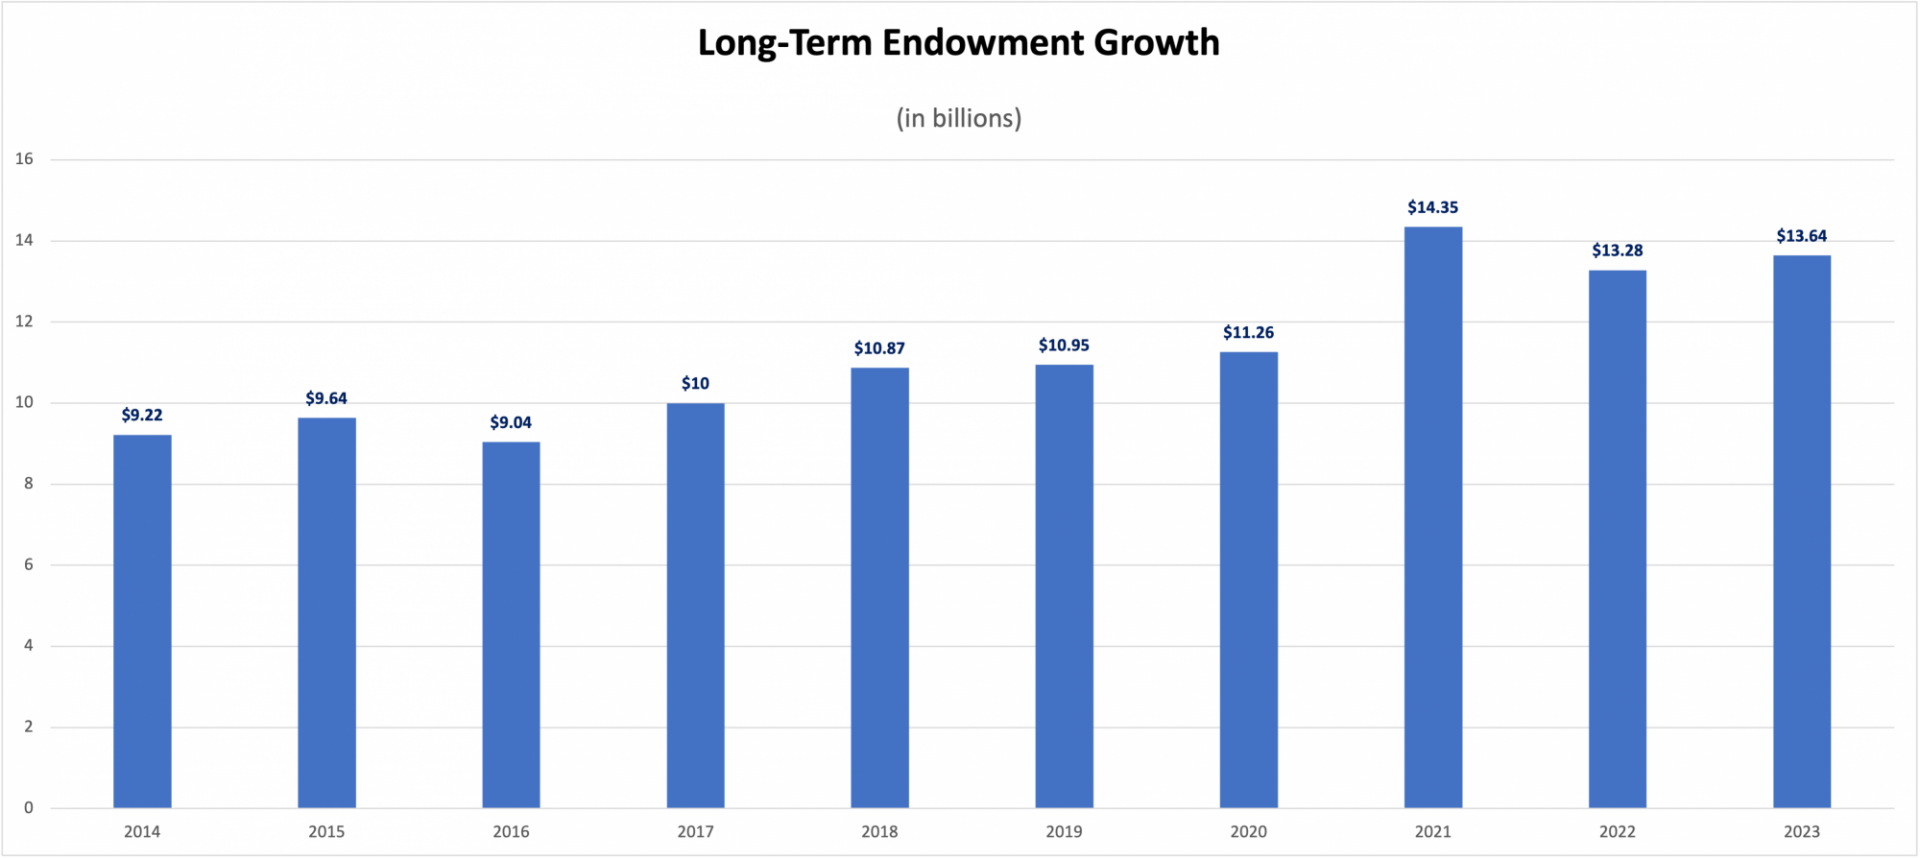 Bar chart showing Long-Term Endowment Growth (in billions) from 2014 to 2023.